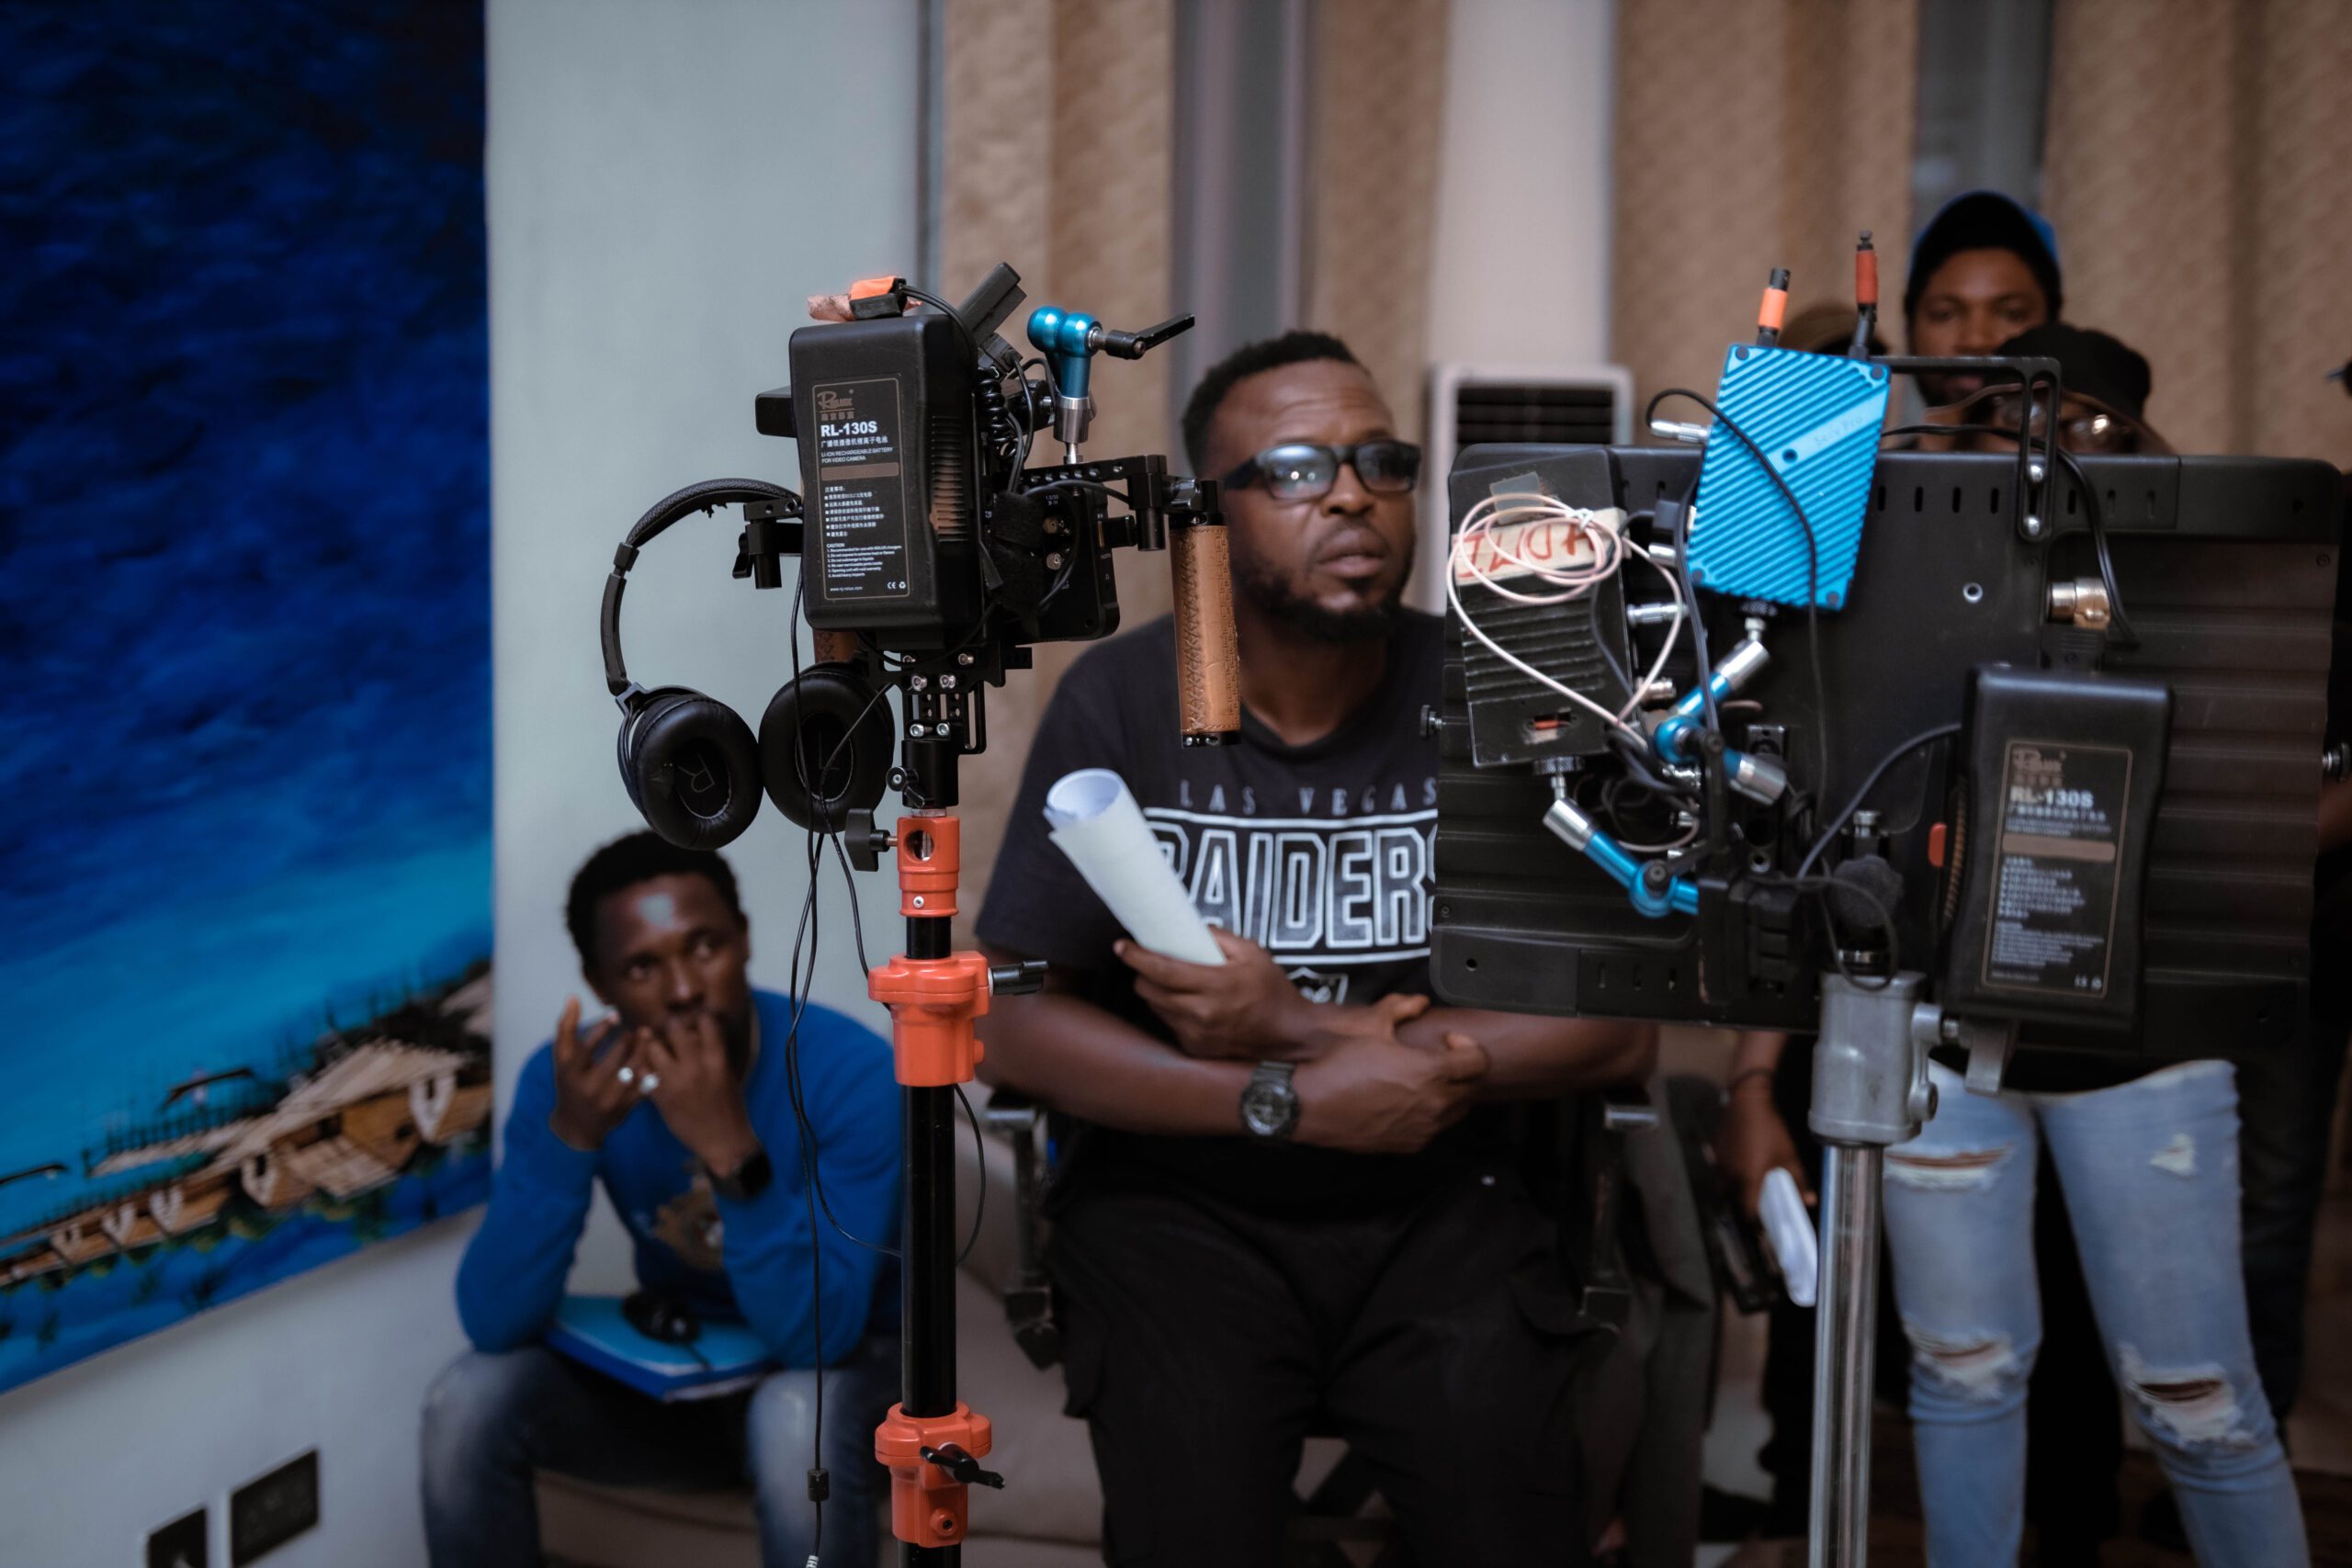 DSF3884 scaled - The Garden Theatre Unveils New Feature Film “Over The Bridge” Directed By Tolu Ajayi (Exclusive)